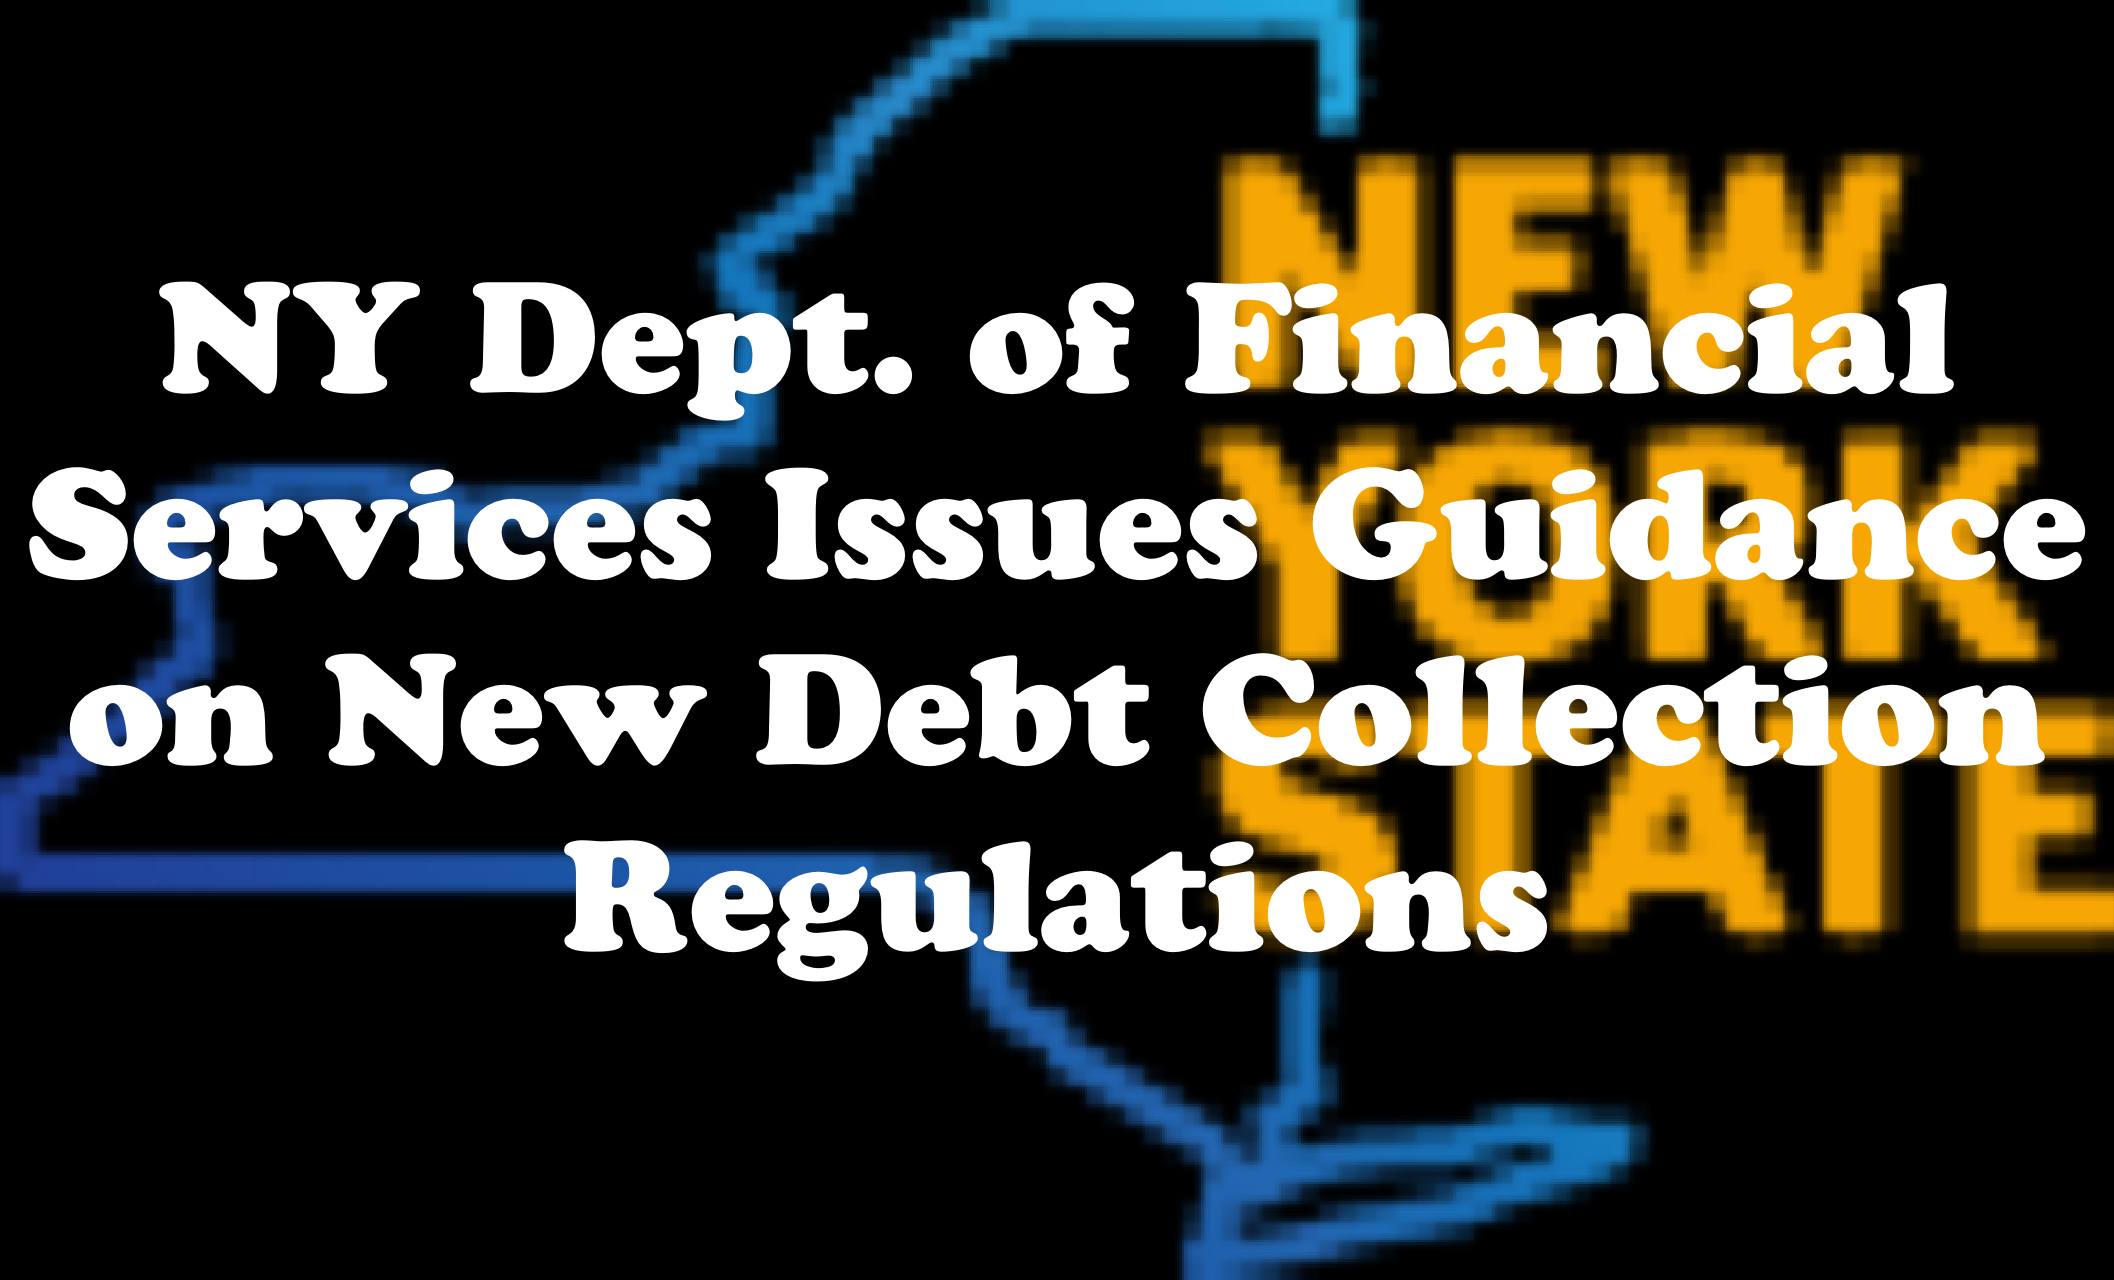 Ny Dept Of Financial Services Issues Guidance On New Debt Collection